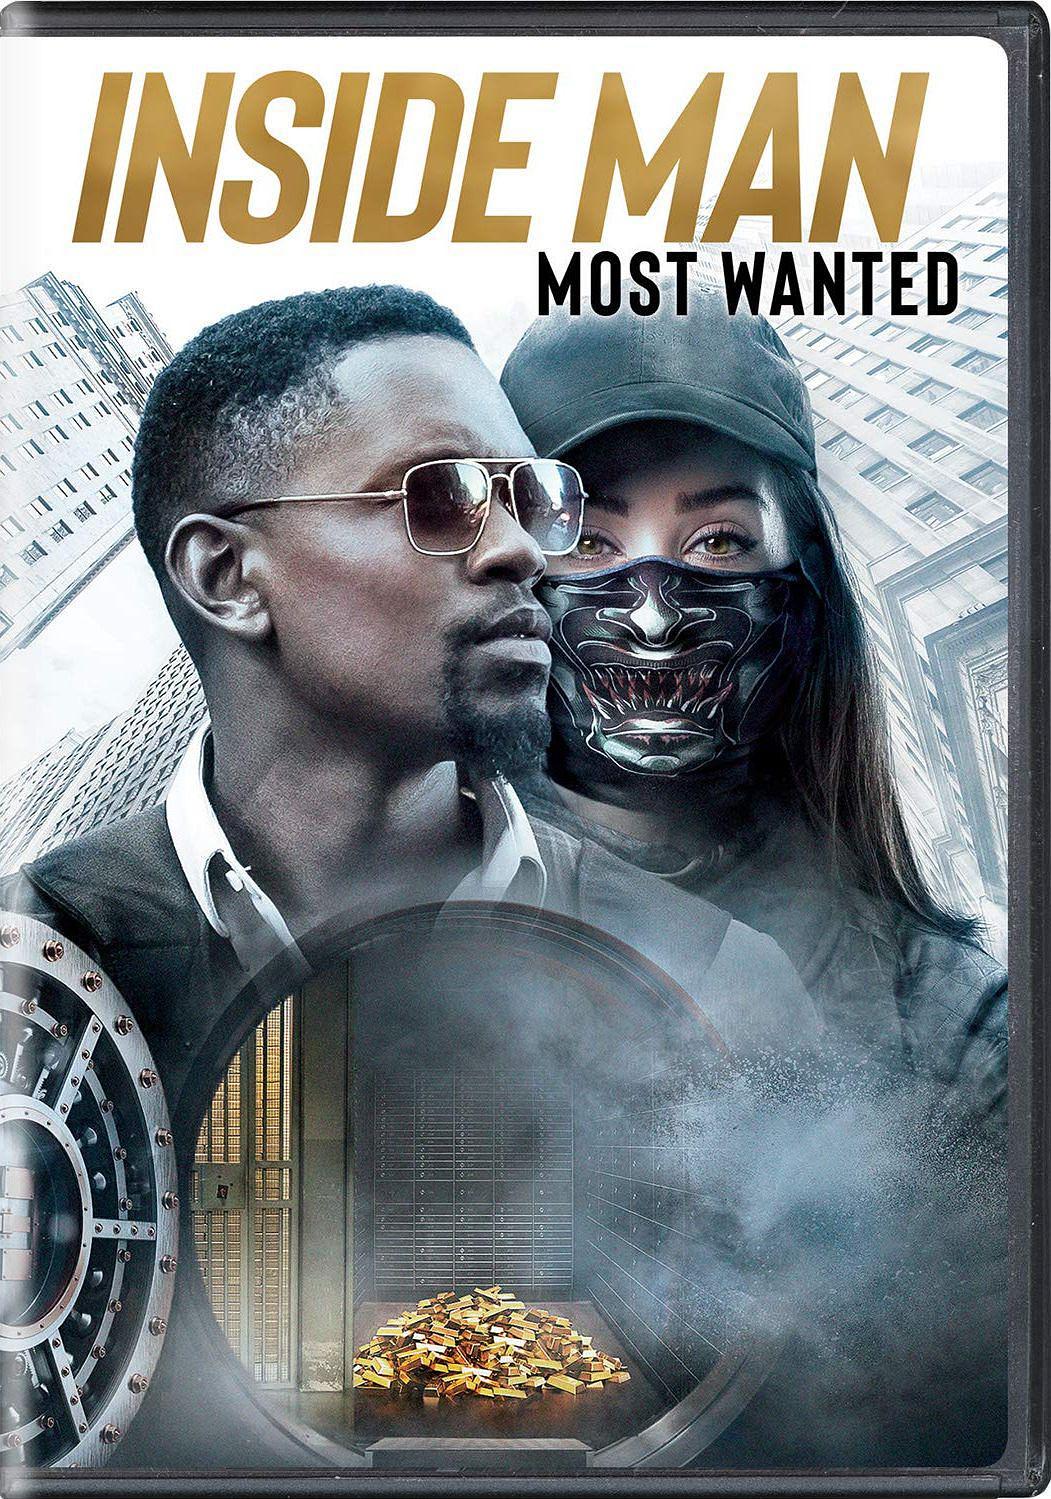 2 Inside.Man.Most.Wanted.2019.1080p.BluRay.REMUX.AVC.DTS-HD.MA.5.1-FGT 24.20G-1.png